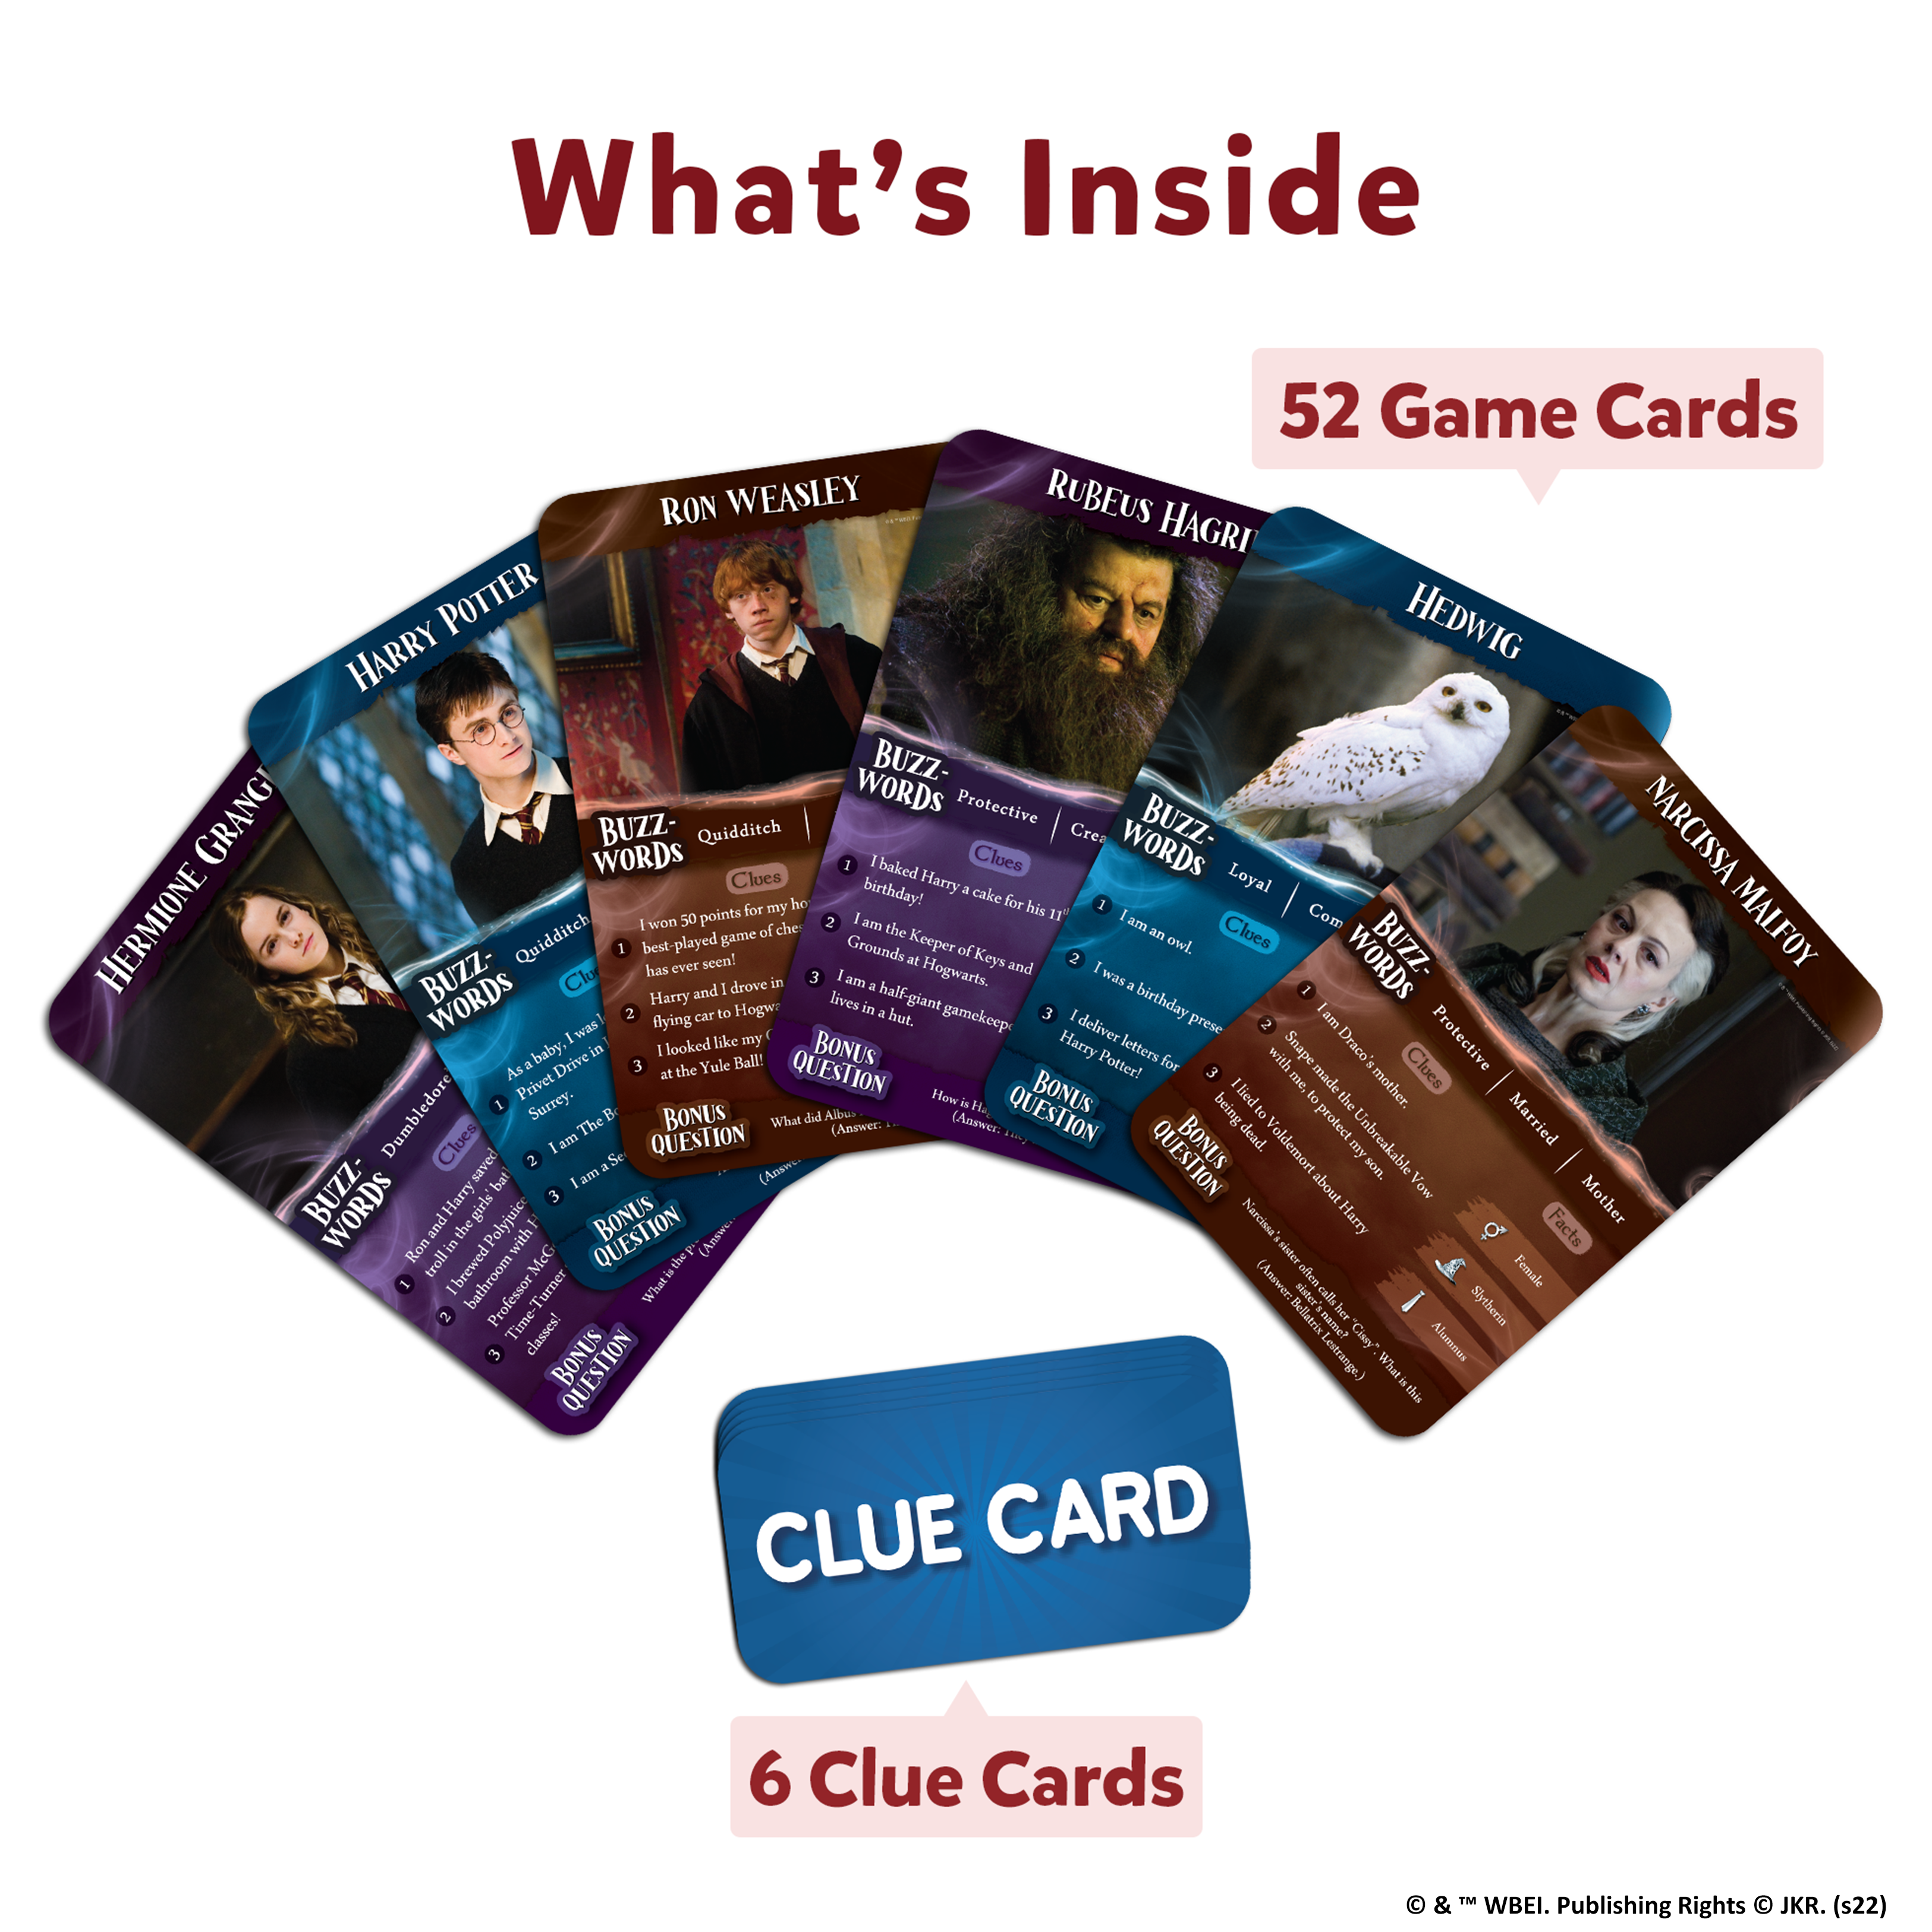 Skillmatics Card Game Guess in 10 : Harry Potter | Gifts for 8 Year Olds and Up | Game of Smart Questions